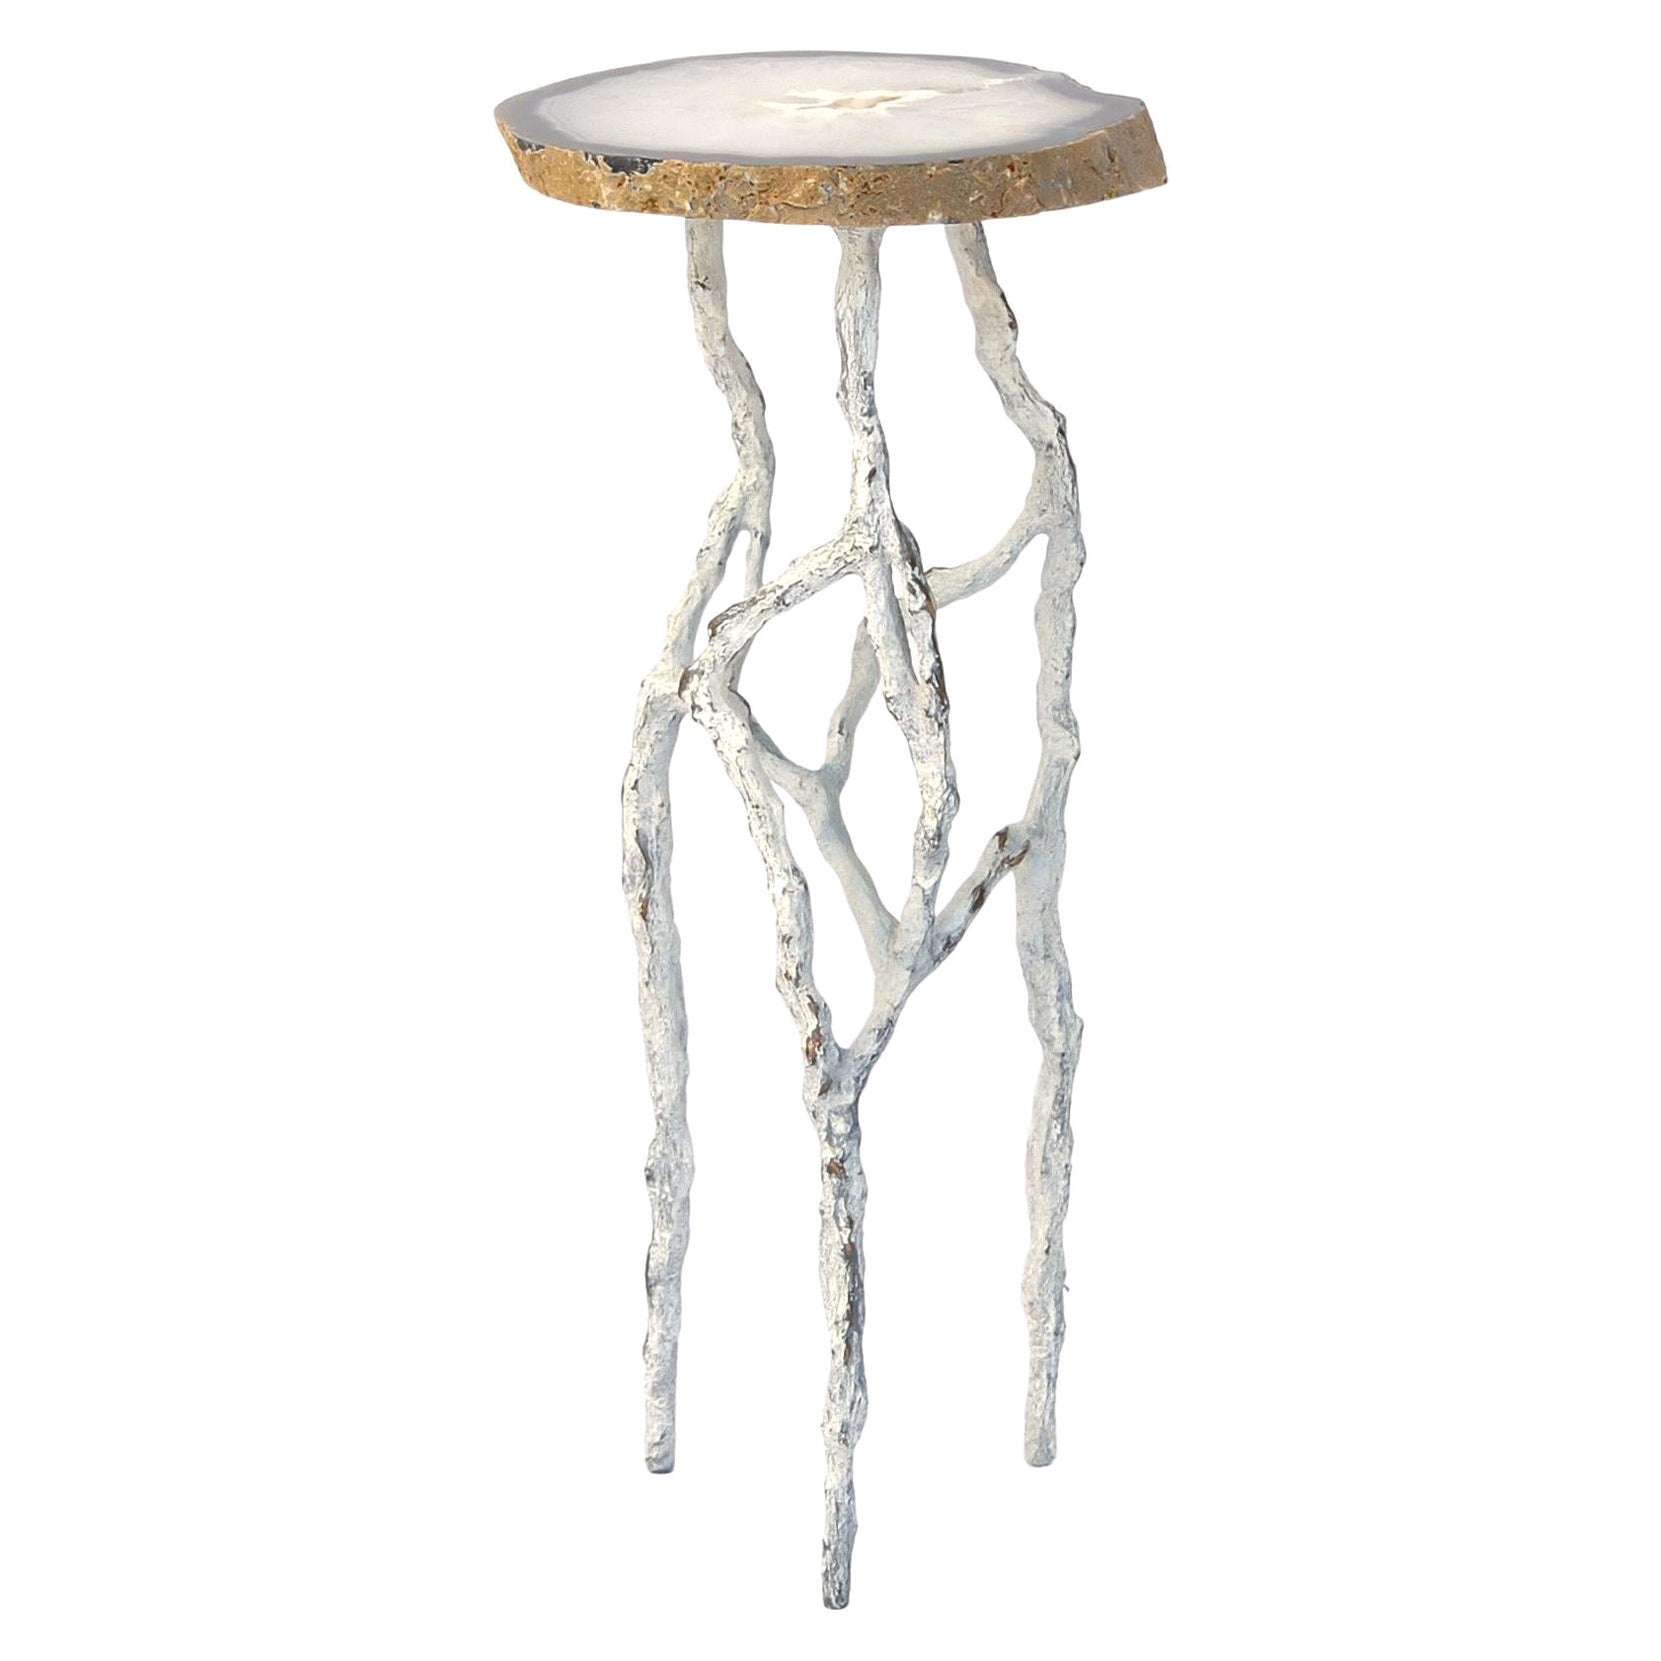 Alexia 3 Drink Table with Agate Top by Fakasaka Design For Sale